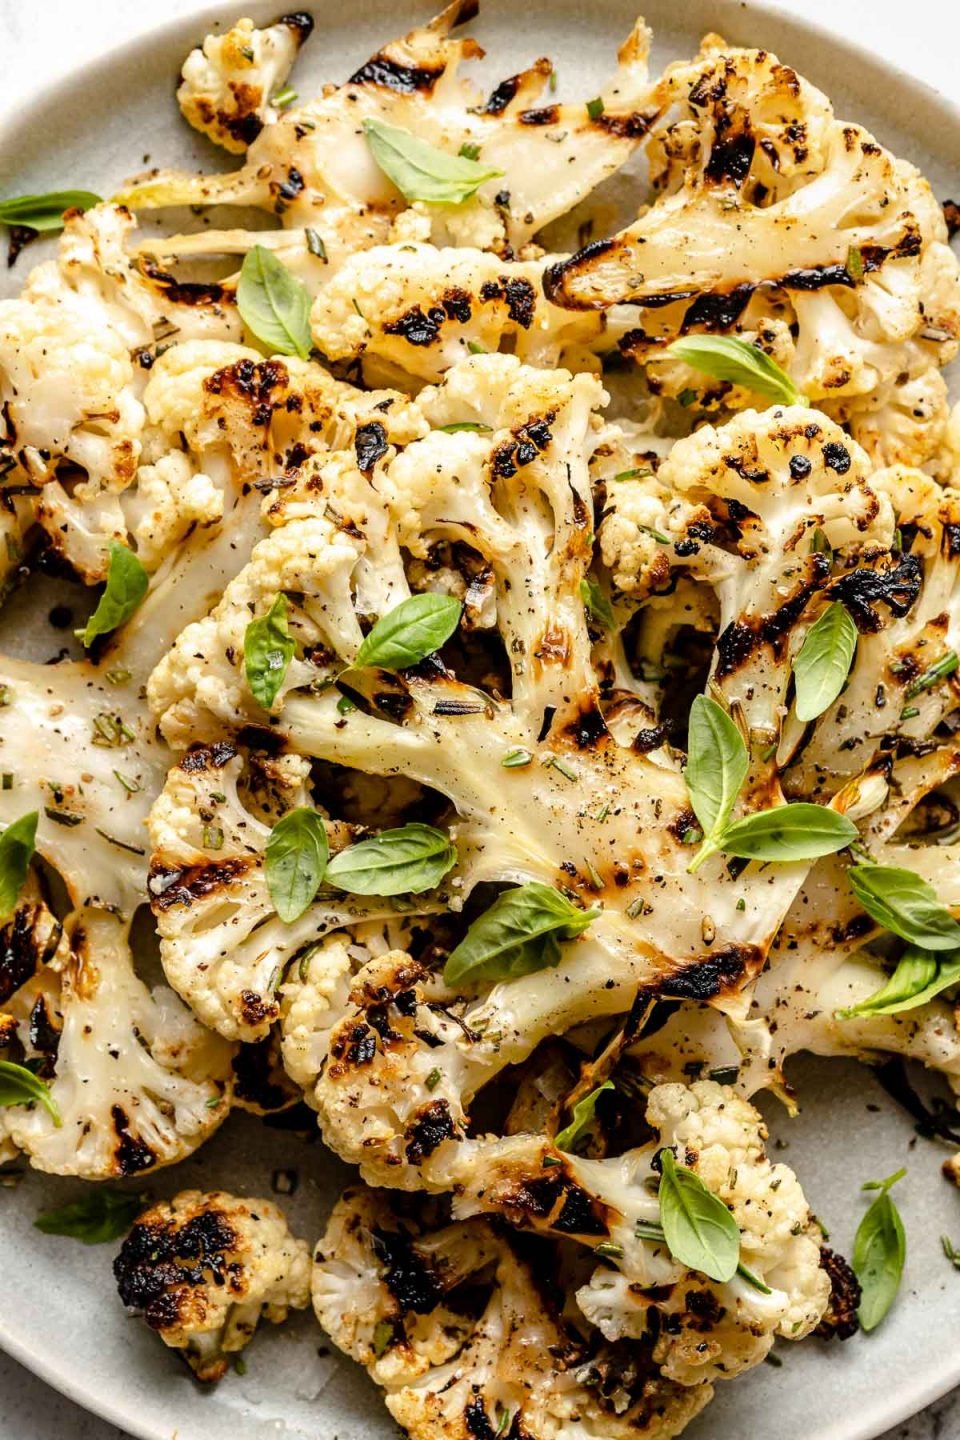 Close up of grilled cauliflower with char marks arranged on a white ceramic plate. Garnished with kosher salt, ground black pepper, & a fresh herbs.